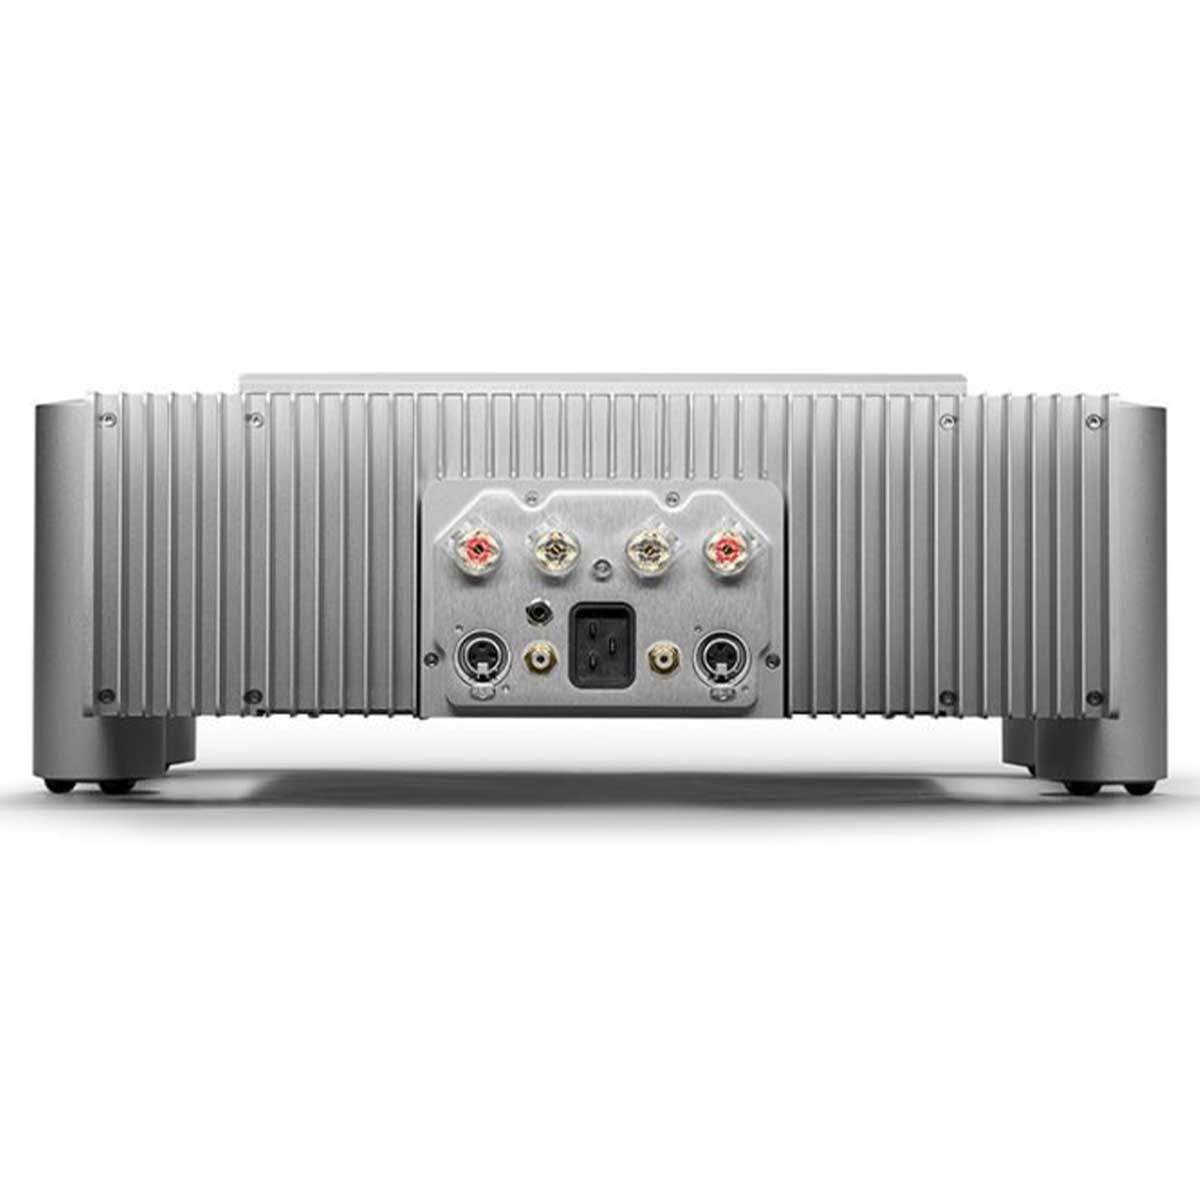 Back view Chord Electronics Ultima 5 300W Signature Power Amplifier - Silver